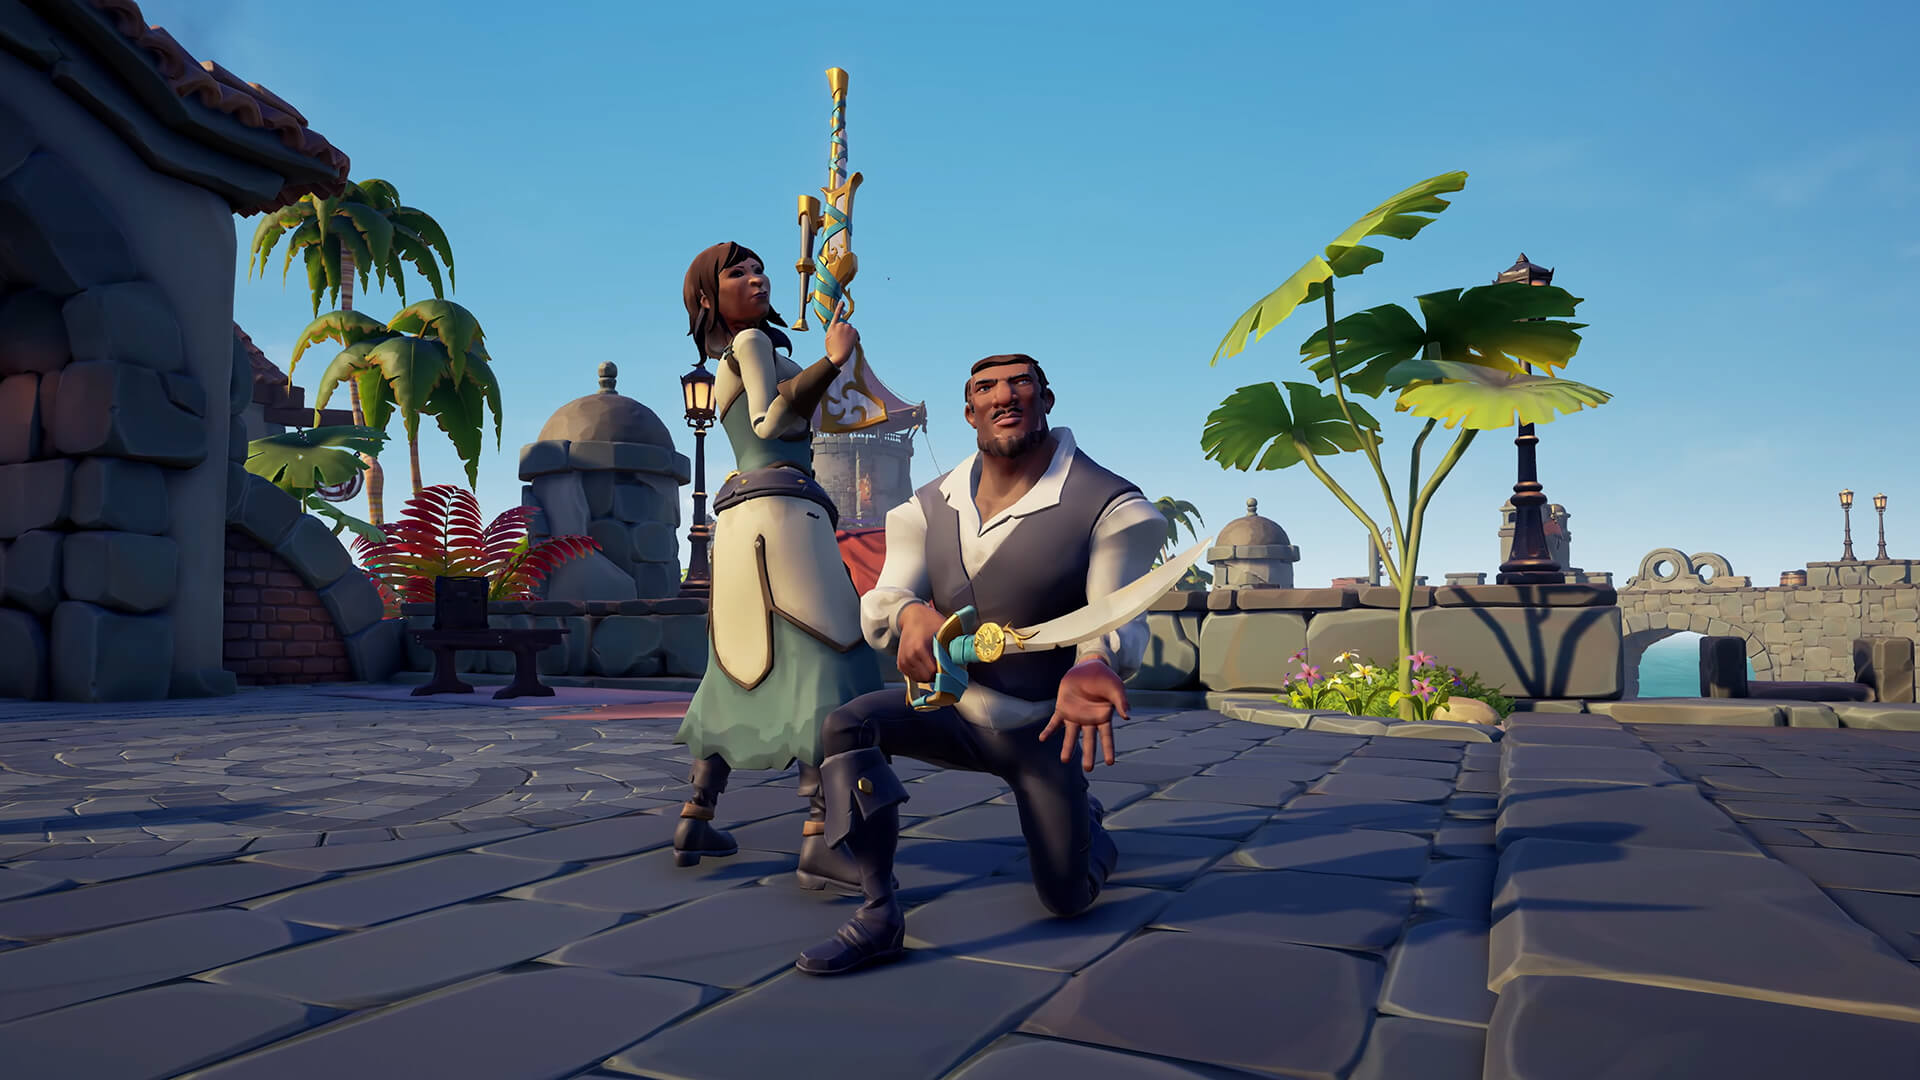 Join the Celebrations as Sea of Thieves Reaches Its Third Anniversary -  Xbox Wire